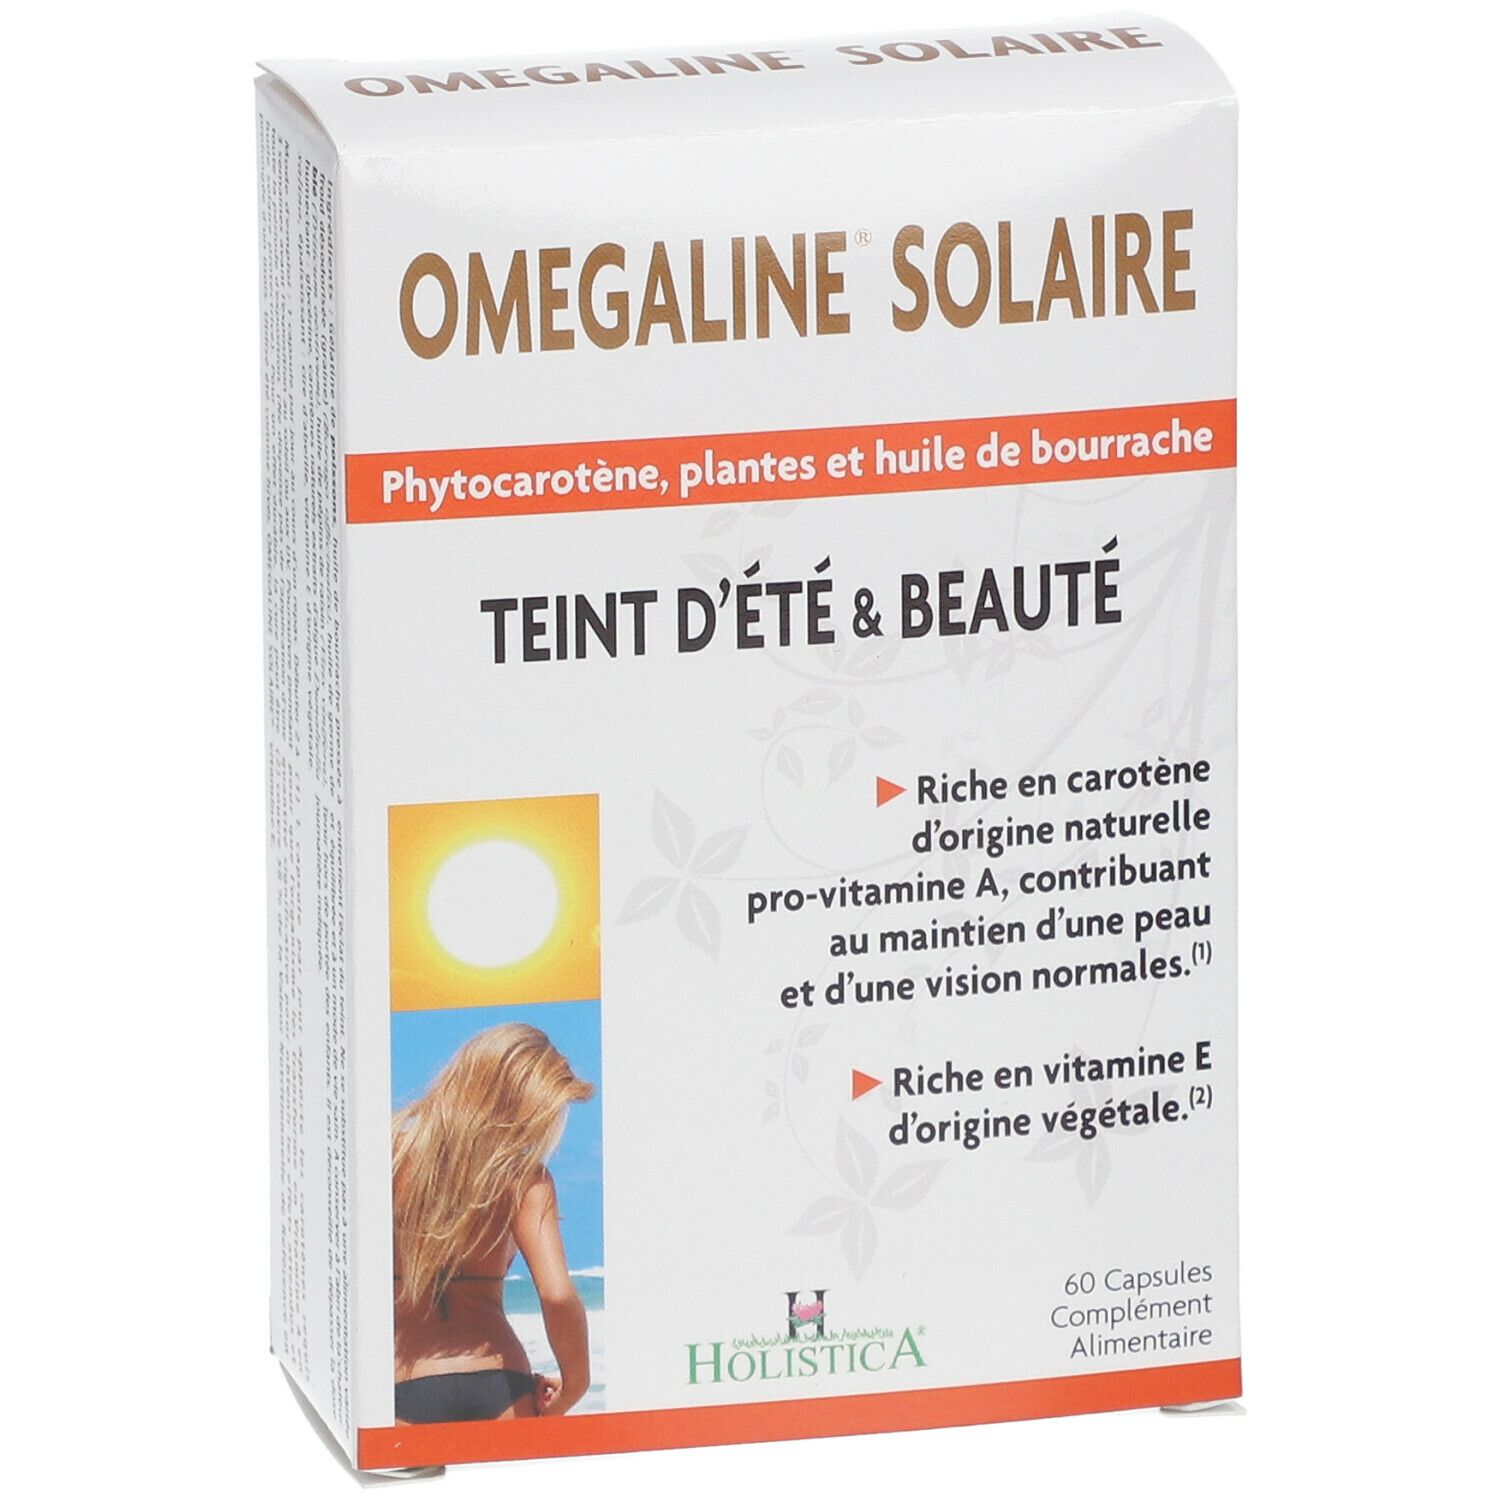 OMEGALINE® SOLAIRE Beauty & Sommerlicher Teint